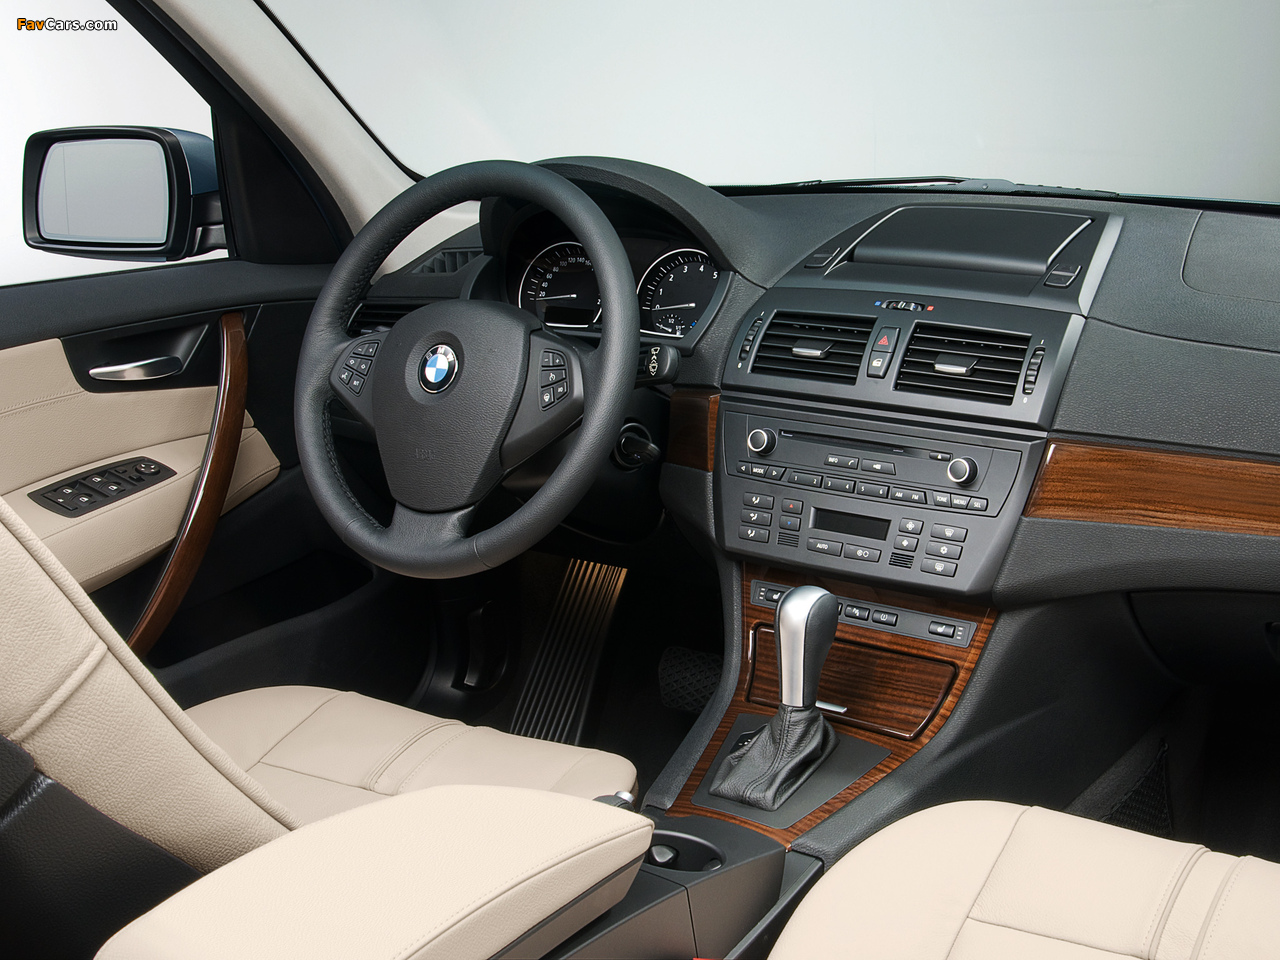 BMW X3 xDrive30i Exclusive Edition (E83) 2008 images (1280 x 960)